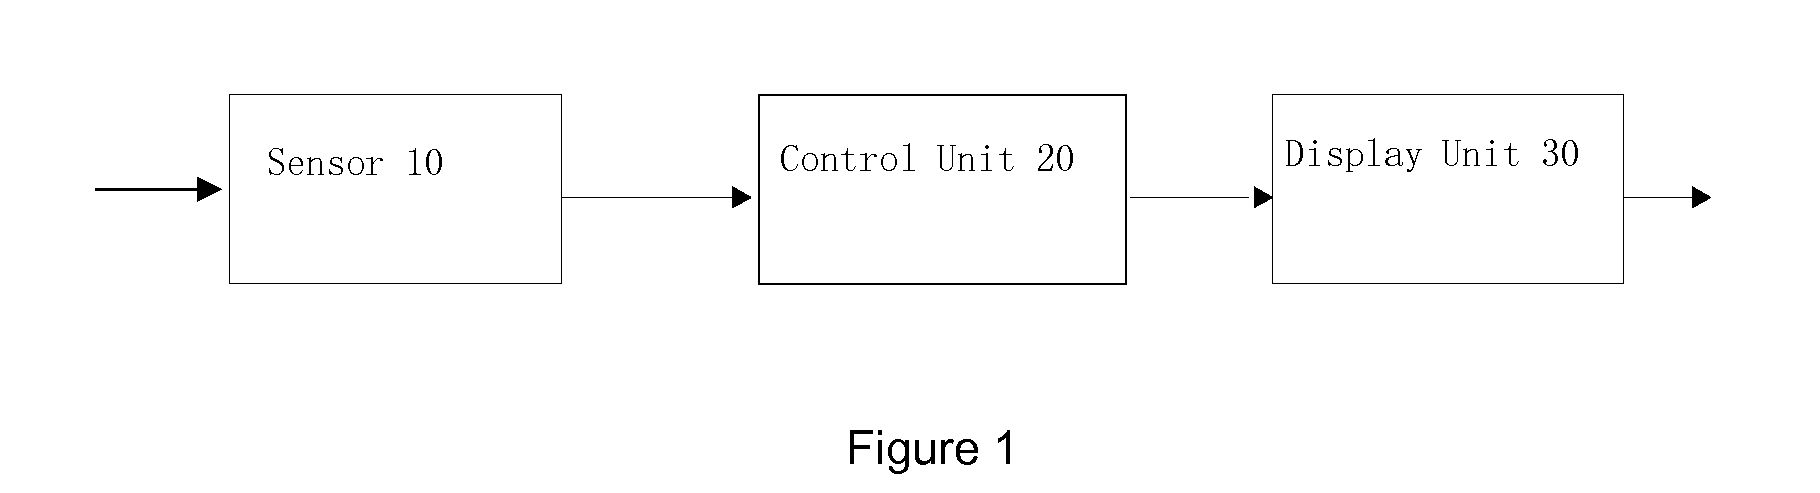 Method and Device for Environmental and Health Monitoring